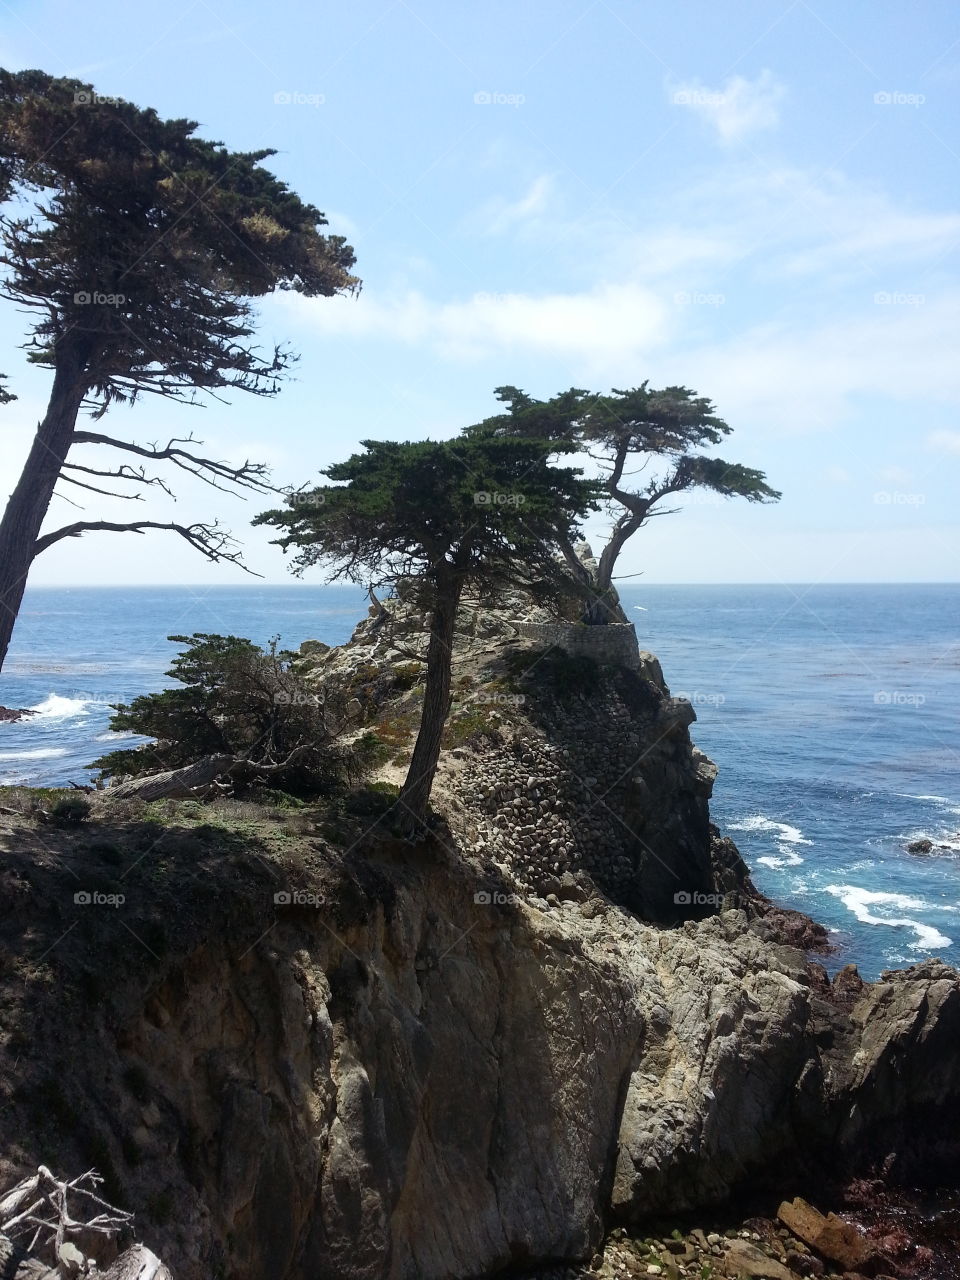 Cypress trees, including The Lone Cypress in Del Monte Forest, CA. Part of the attractions of the 18 mile drive circuit in Pebble Beach.